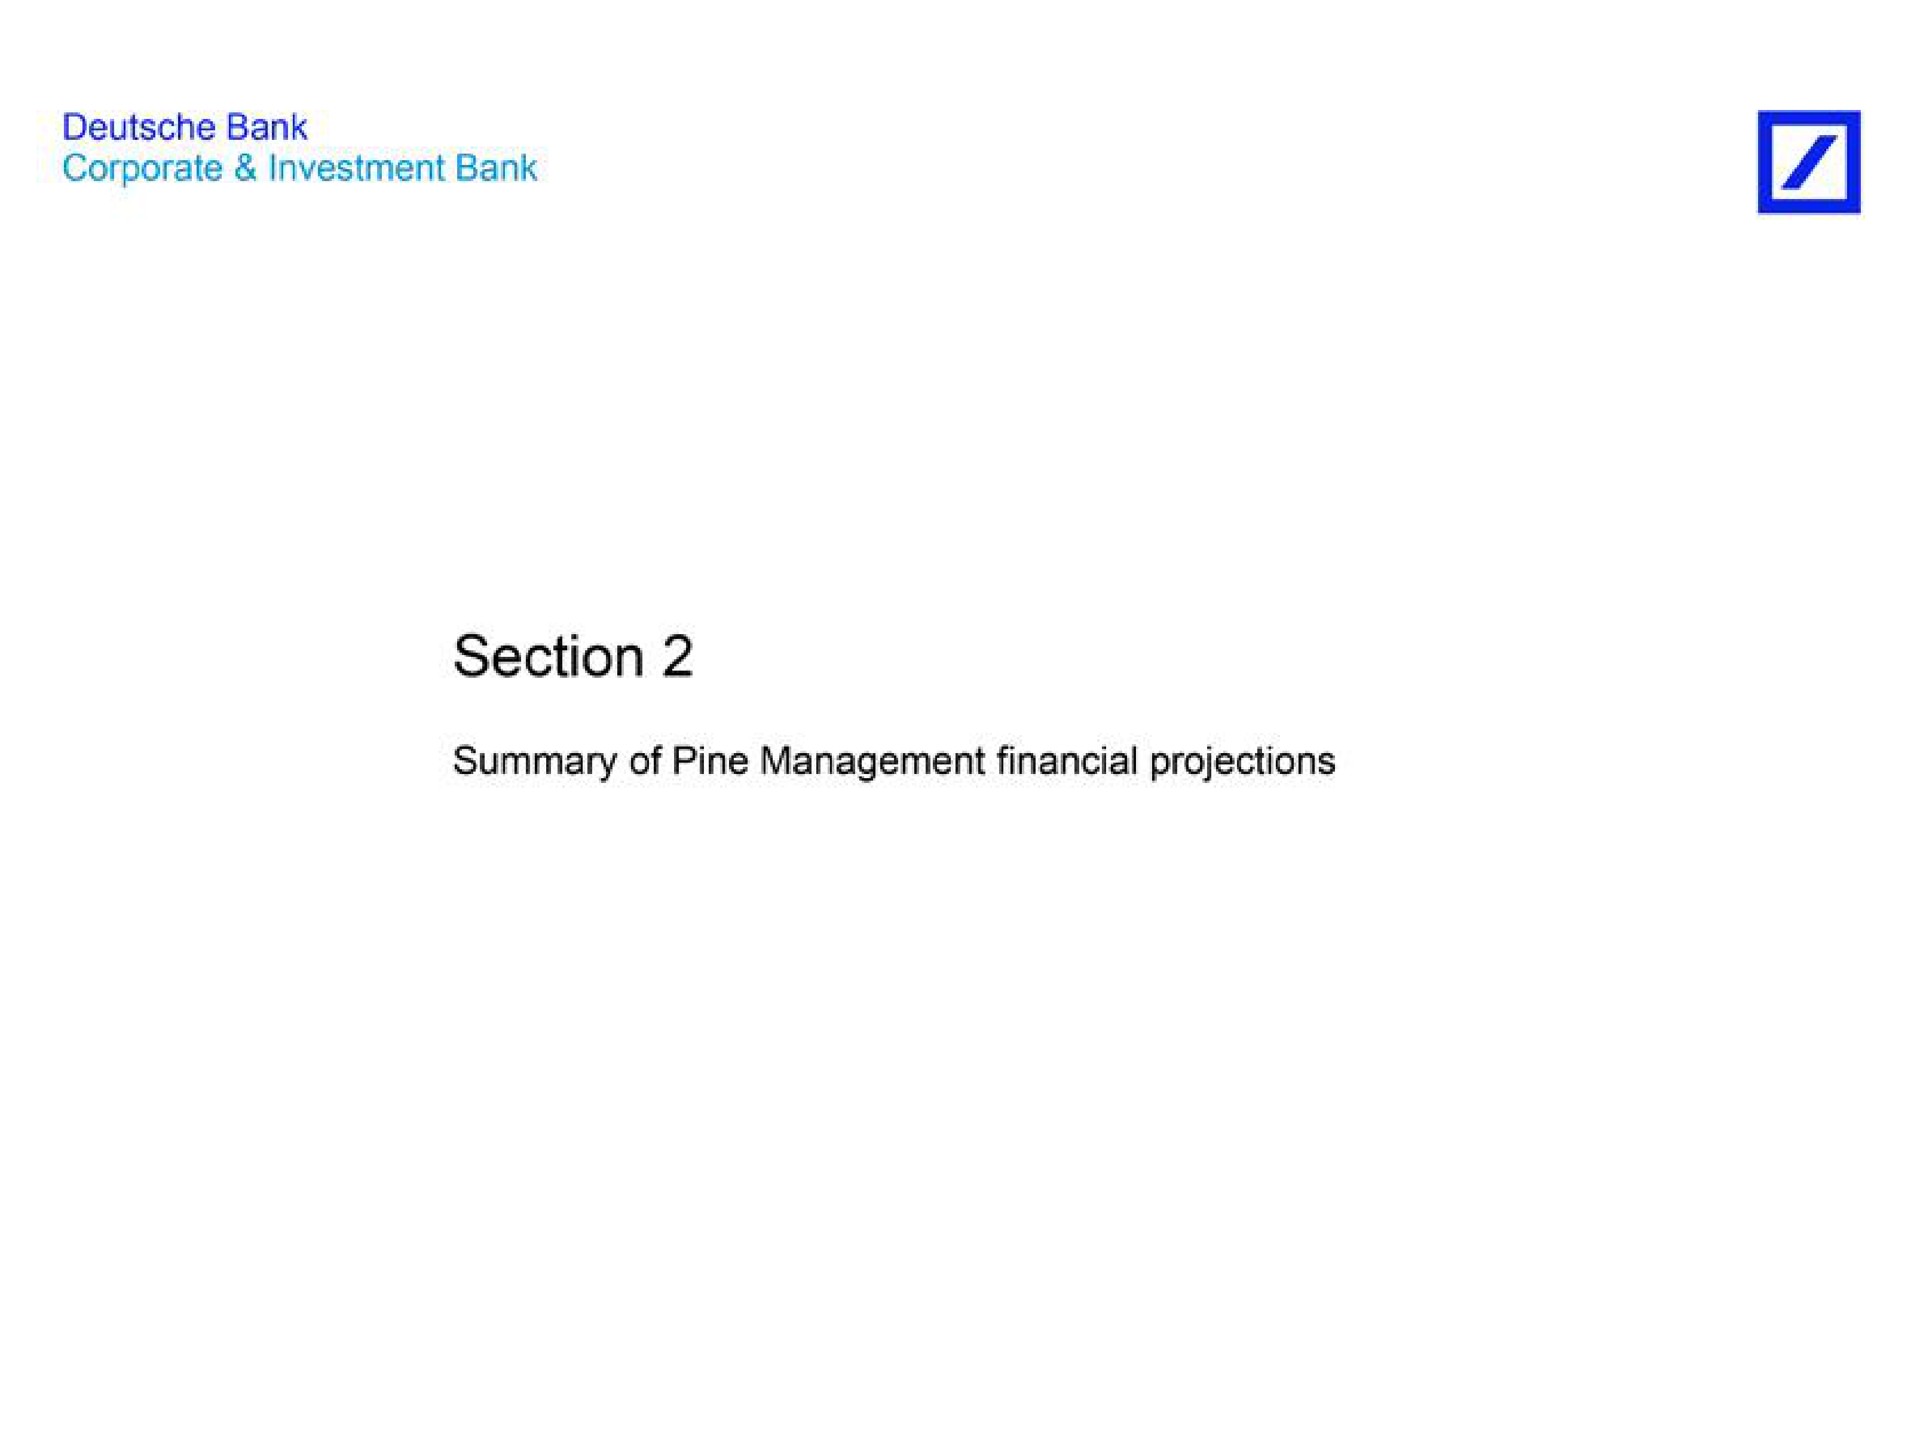 corporate investment bank section summary of pine management financial projections | Deutsche Bank